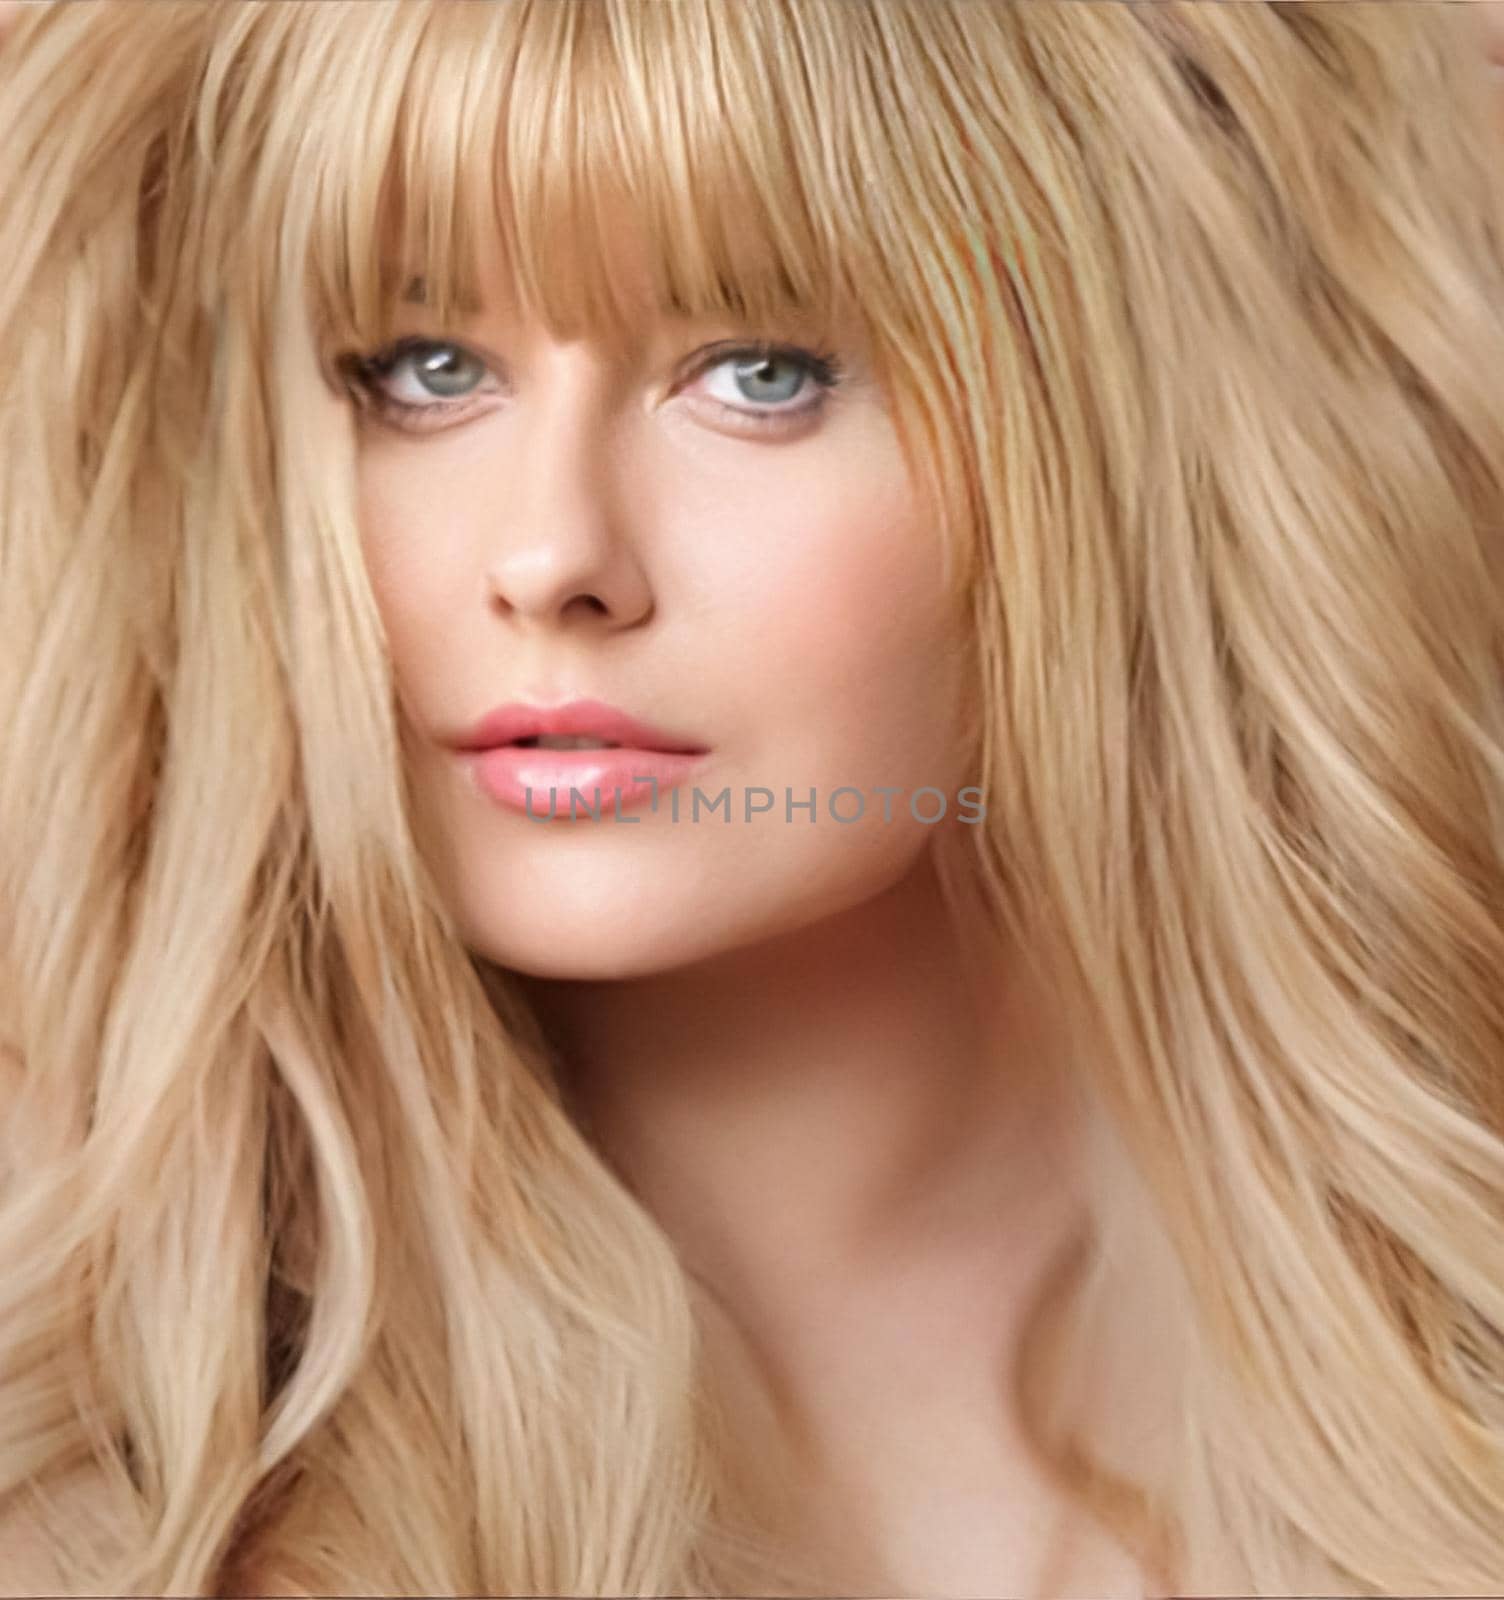 Hairstyle, beauty and hair care, beautiful blonde woman with long blond hair, glamour portrait for hair salon and haircare by Anneleven